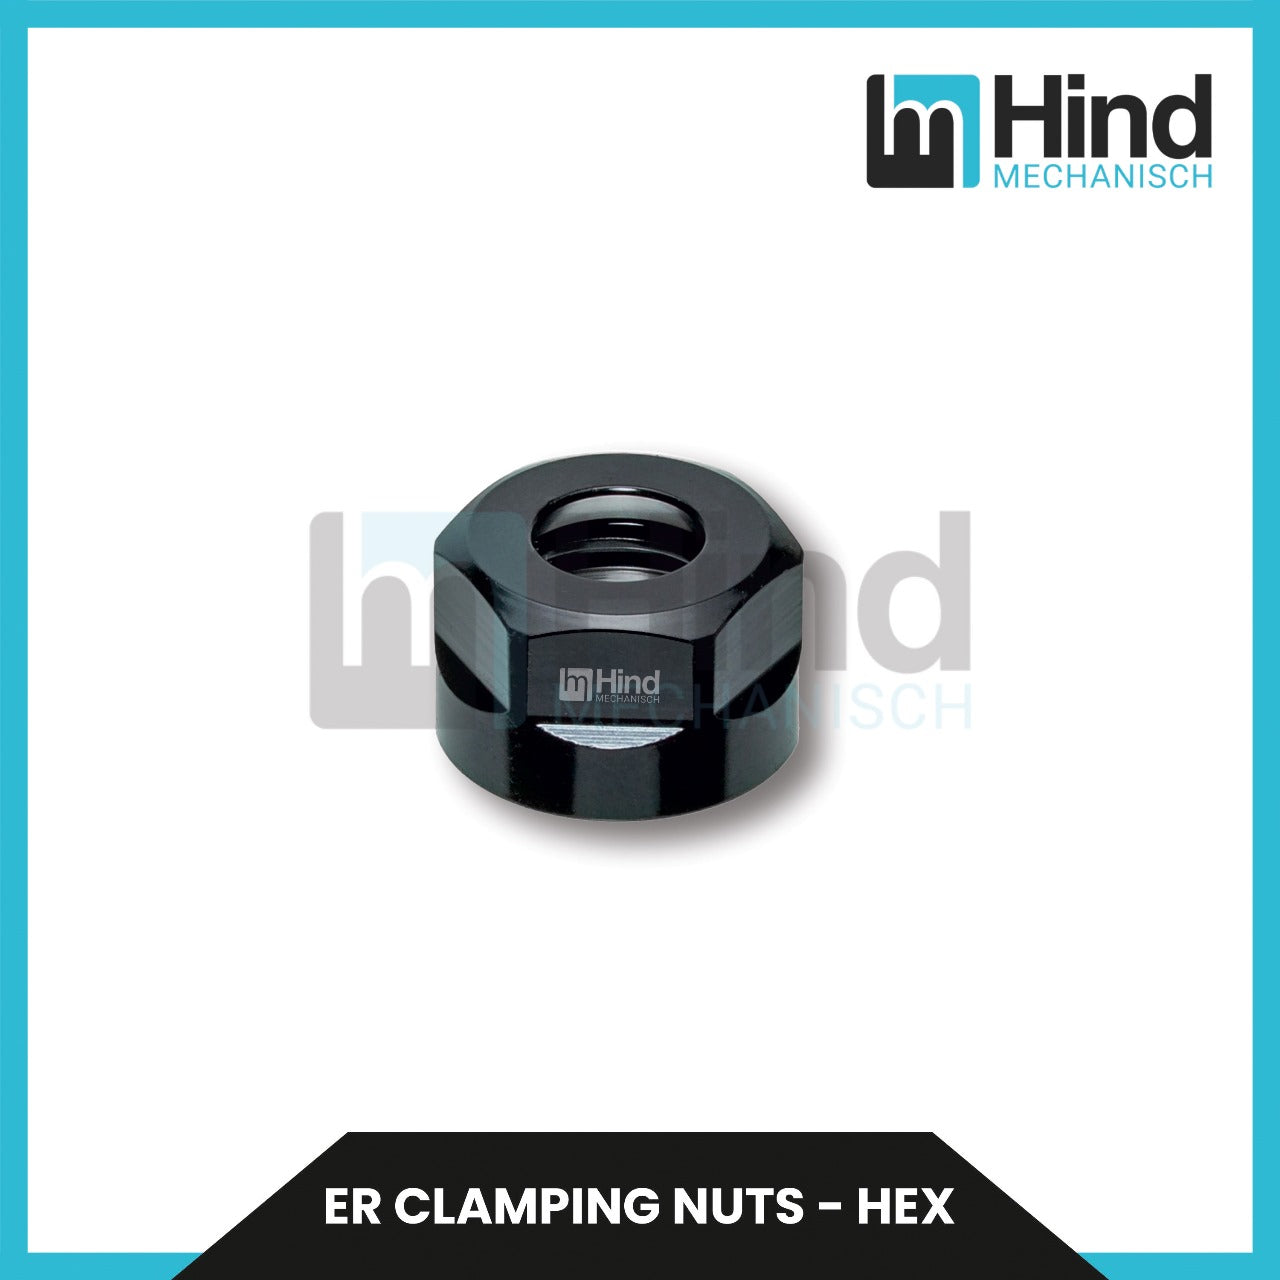 ER CLAMPING NUTS - HEX